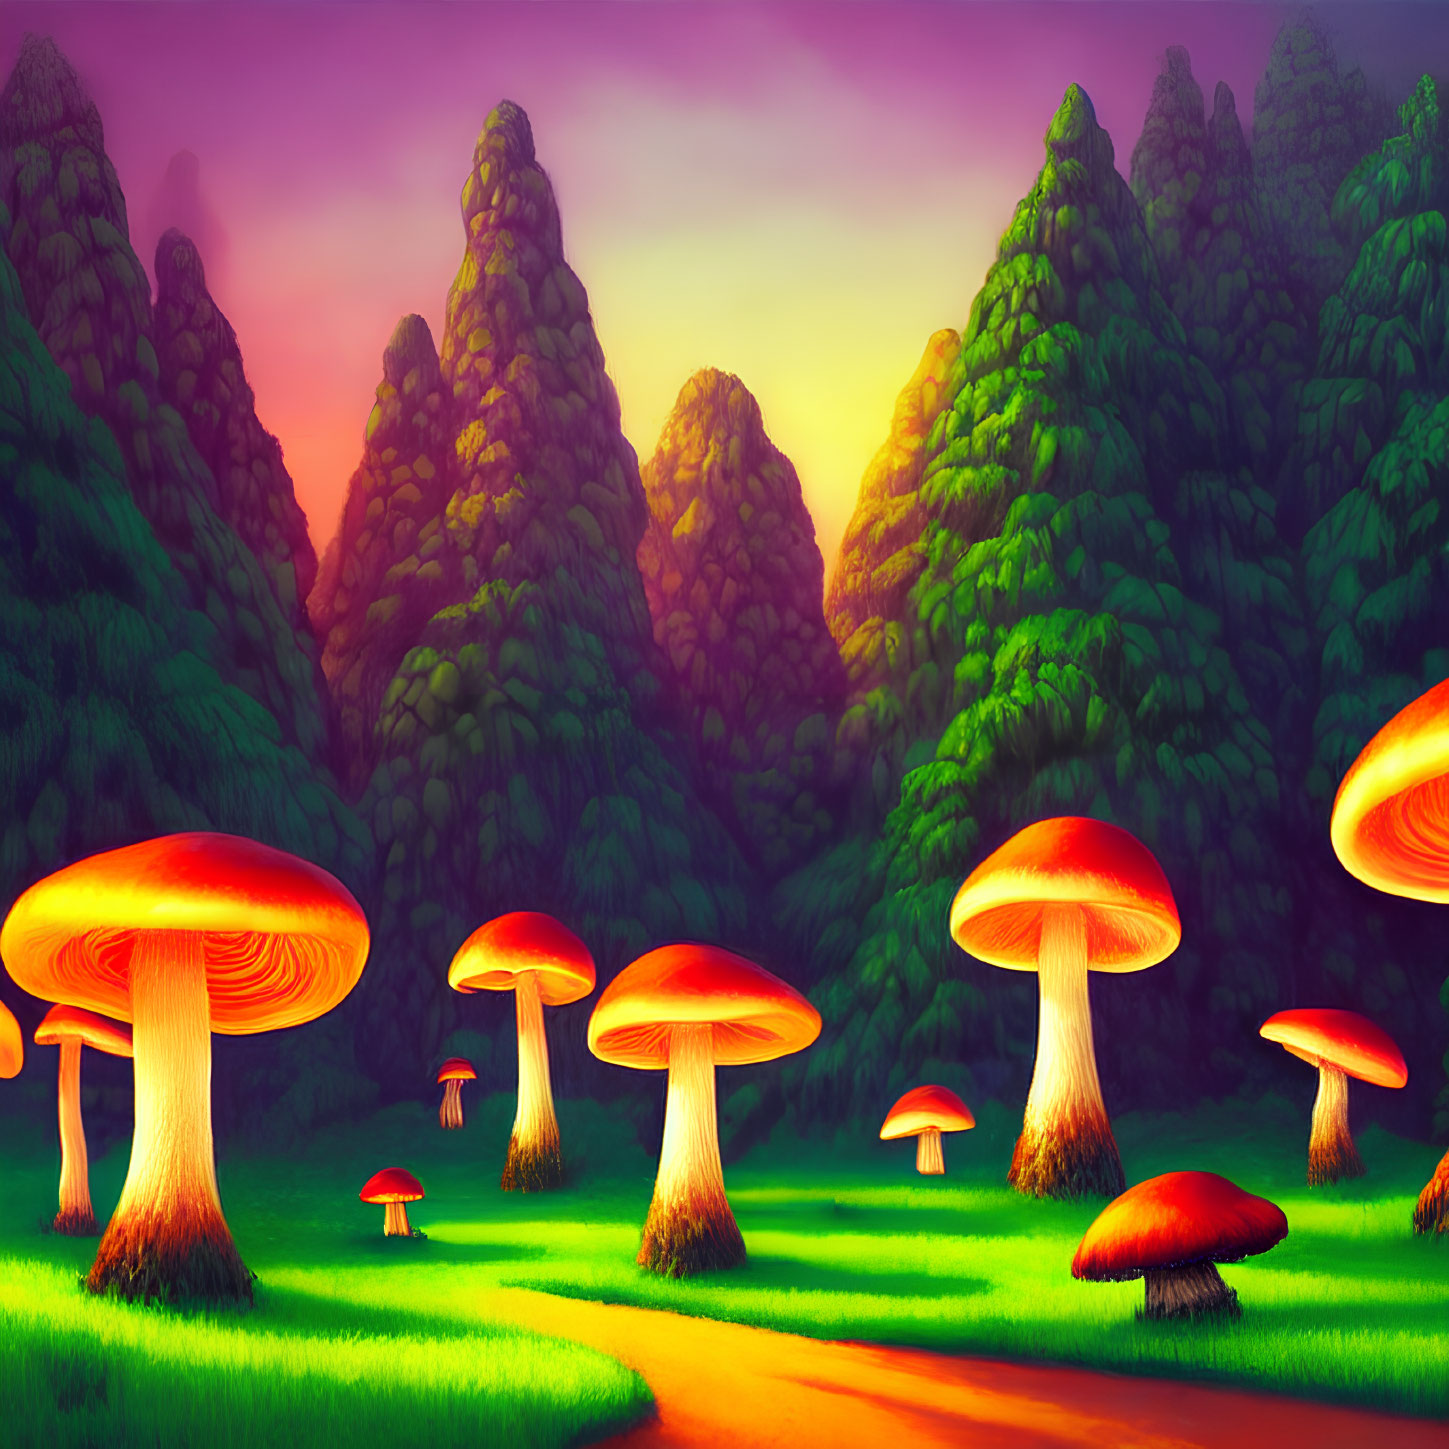 Fantasy landscape with oversized glowing mushrooms and lush forest path